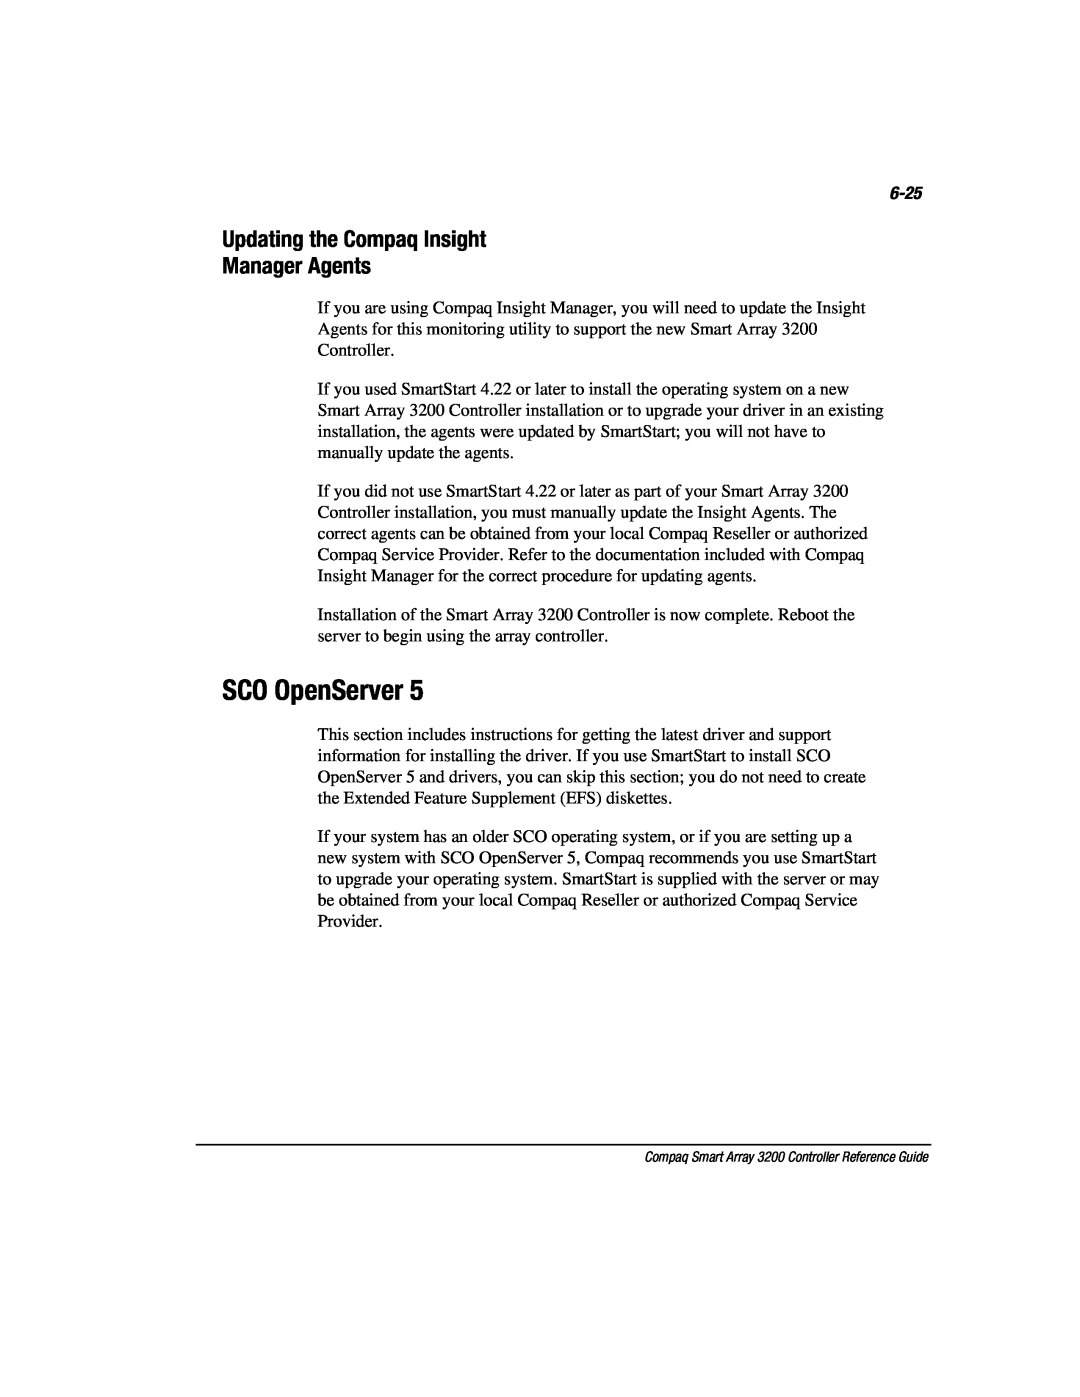 Compaq 3200 manual SCO OpenServer, 6-25, Updating the Compaq Insight Manager Agents 